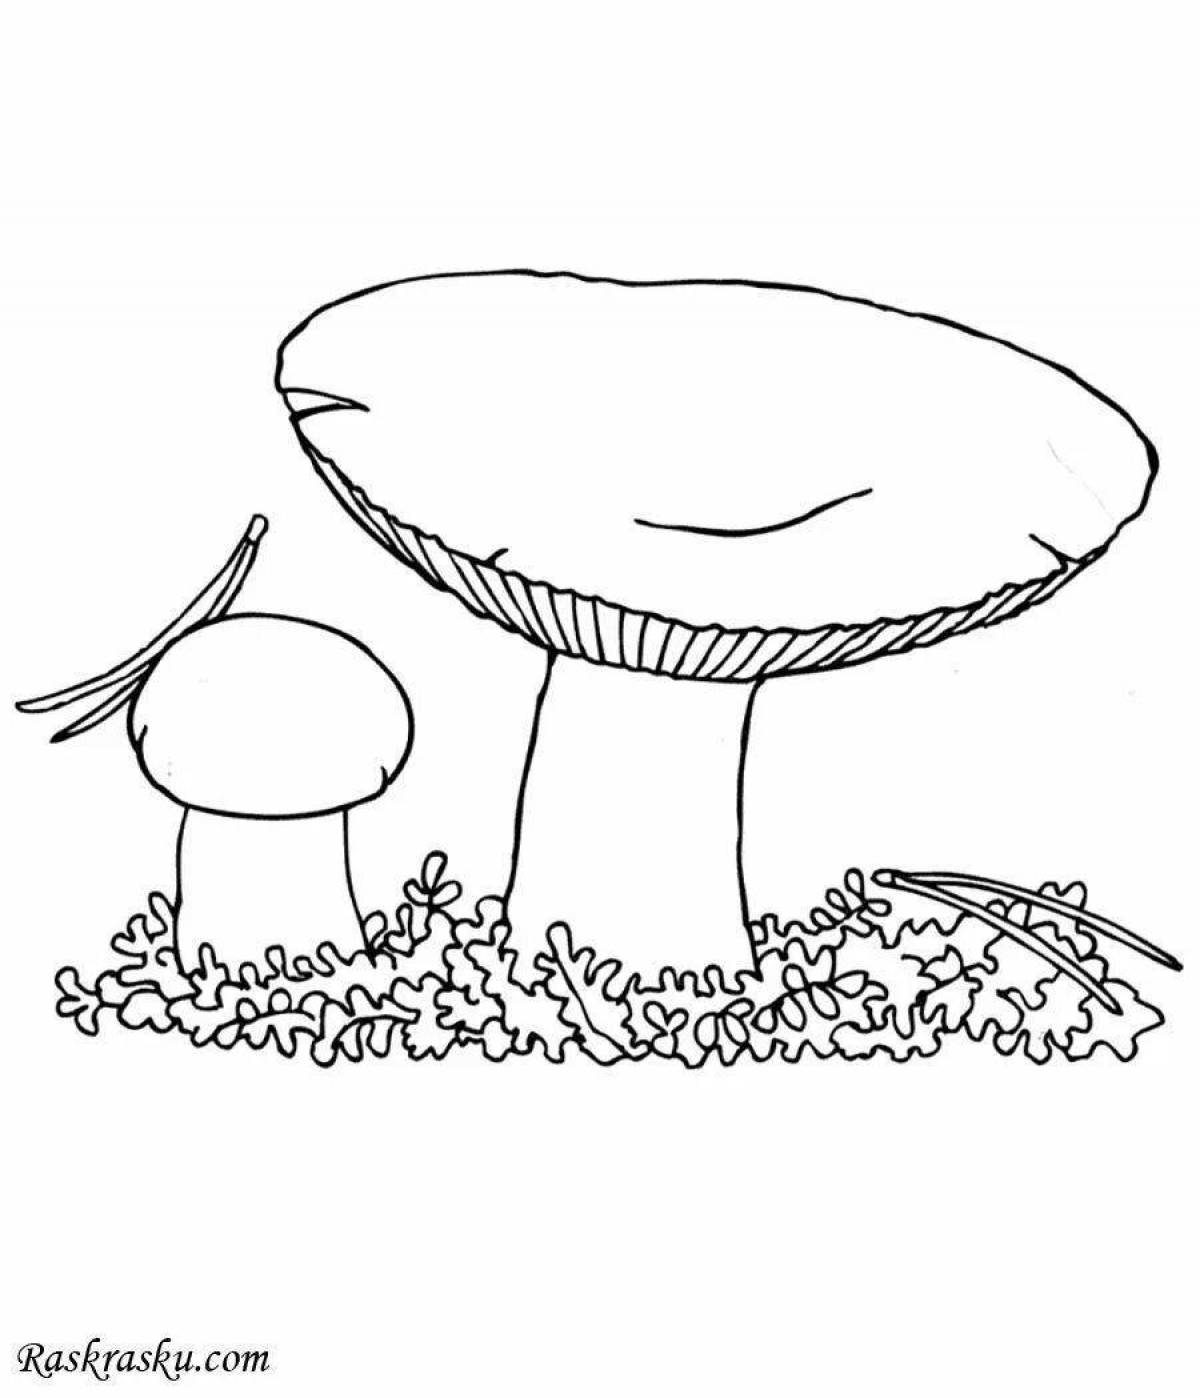 Exquisite mushroom coloring book for 6-7 year olds